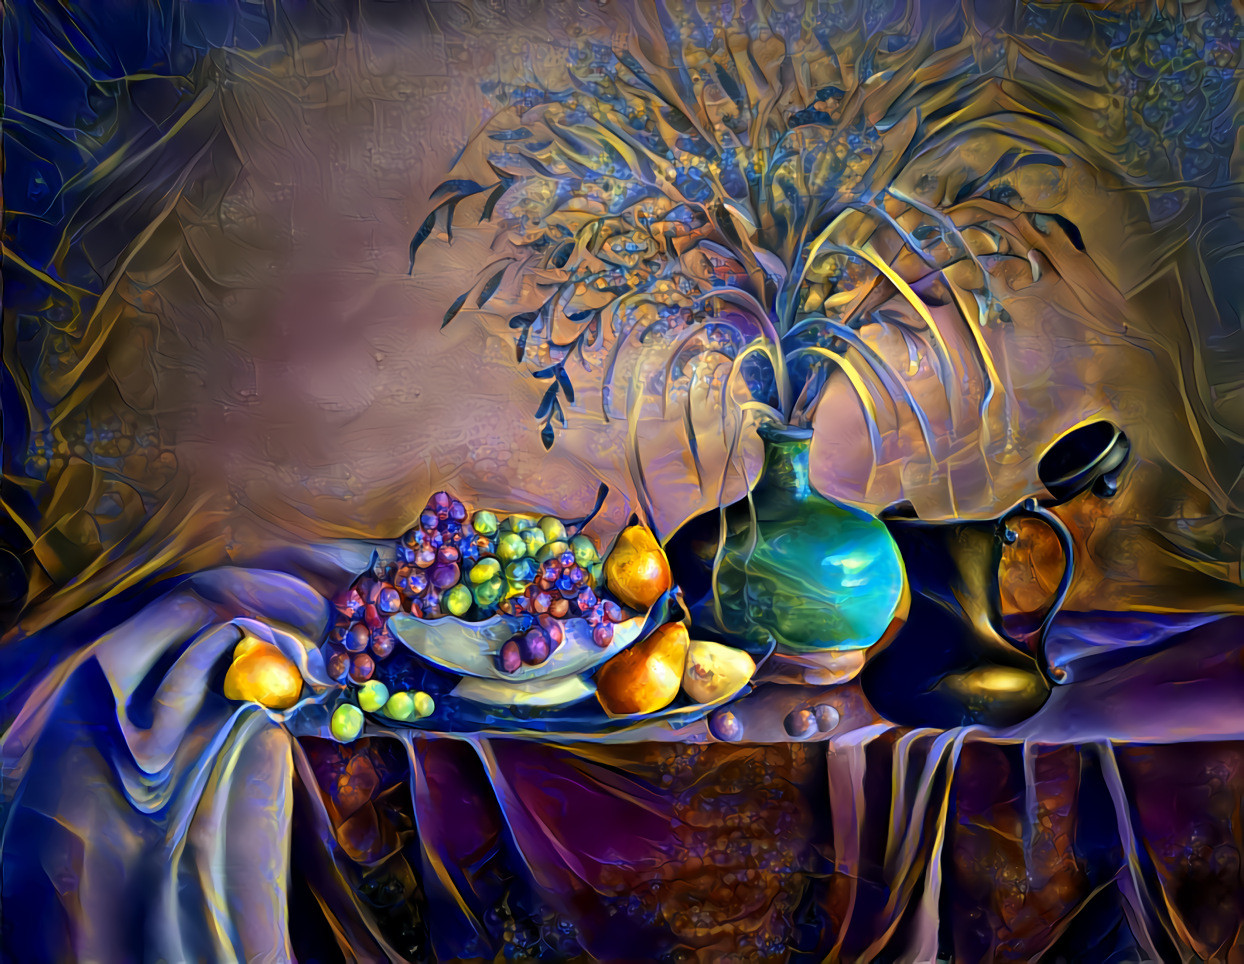 "Still life with a green vase and fruit" 